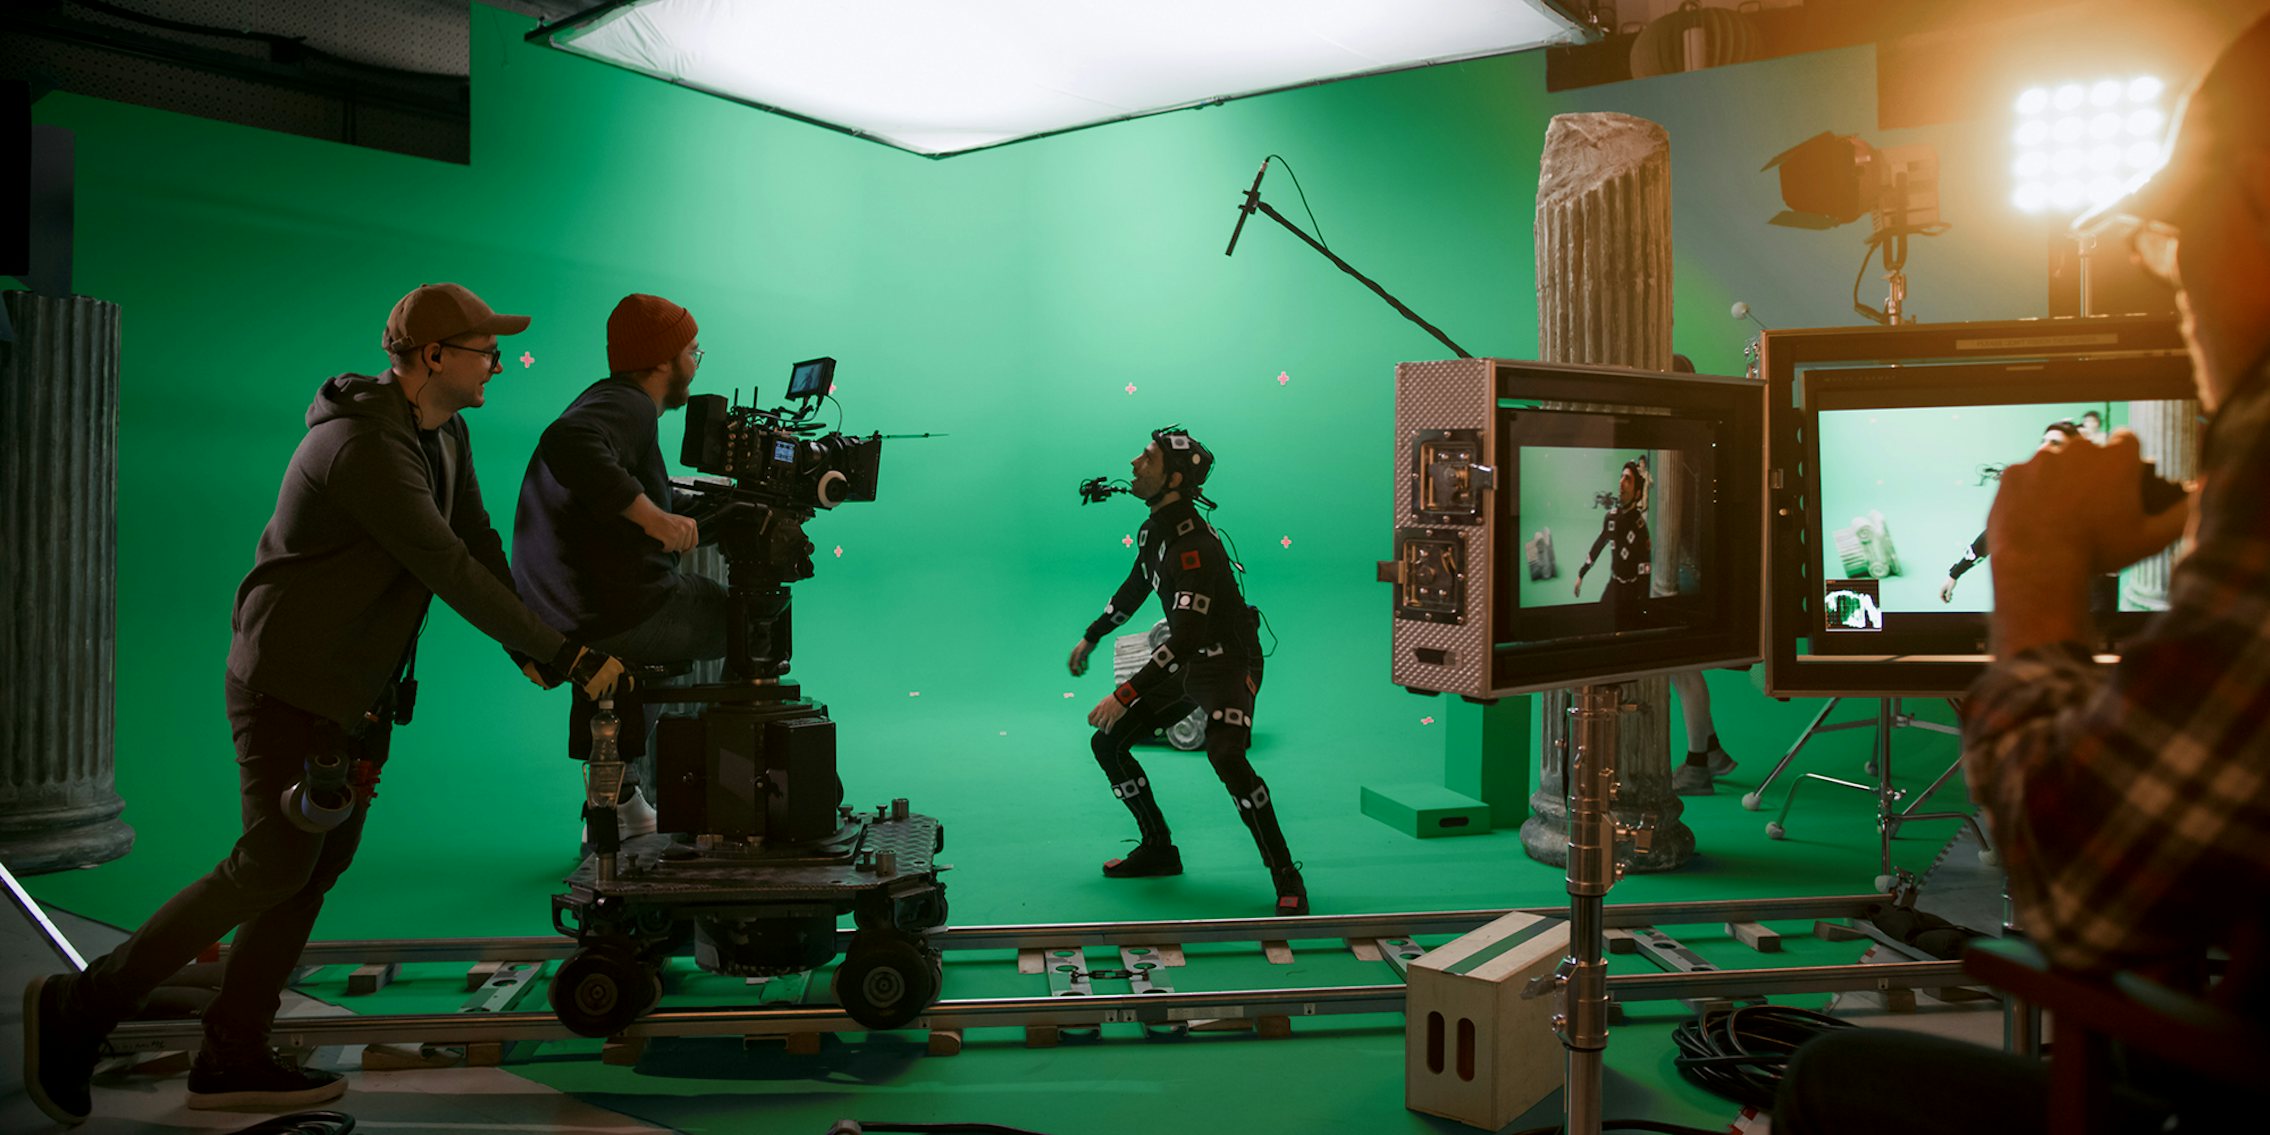 In the Big Film Studio Professional Crew Shooting Blockbuster Movie. Director Commands Cameraman to Start shooting Green Screen CGI Scene with Actor Wearing Motion Tracking Suit and Head Rig